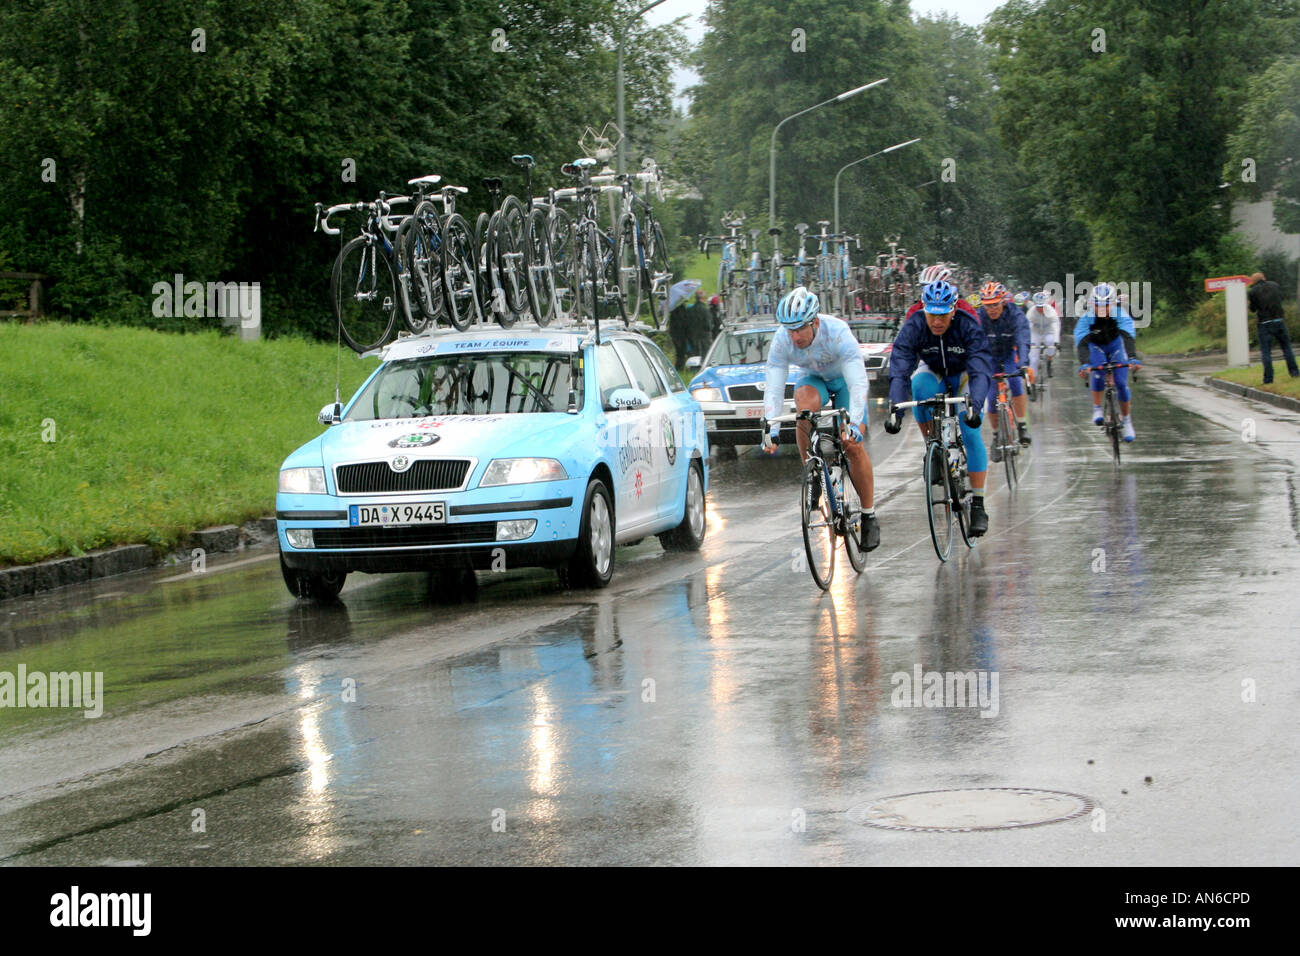 Cyclists and accompanying cars at the Professional bicycle race German Tour 2006 Bad Toelz Bavaria Germany Stock Photo